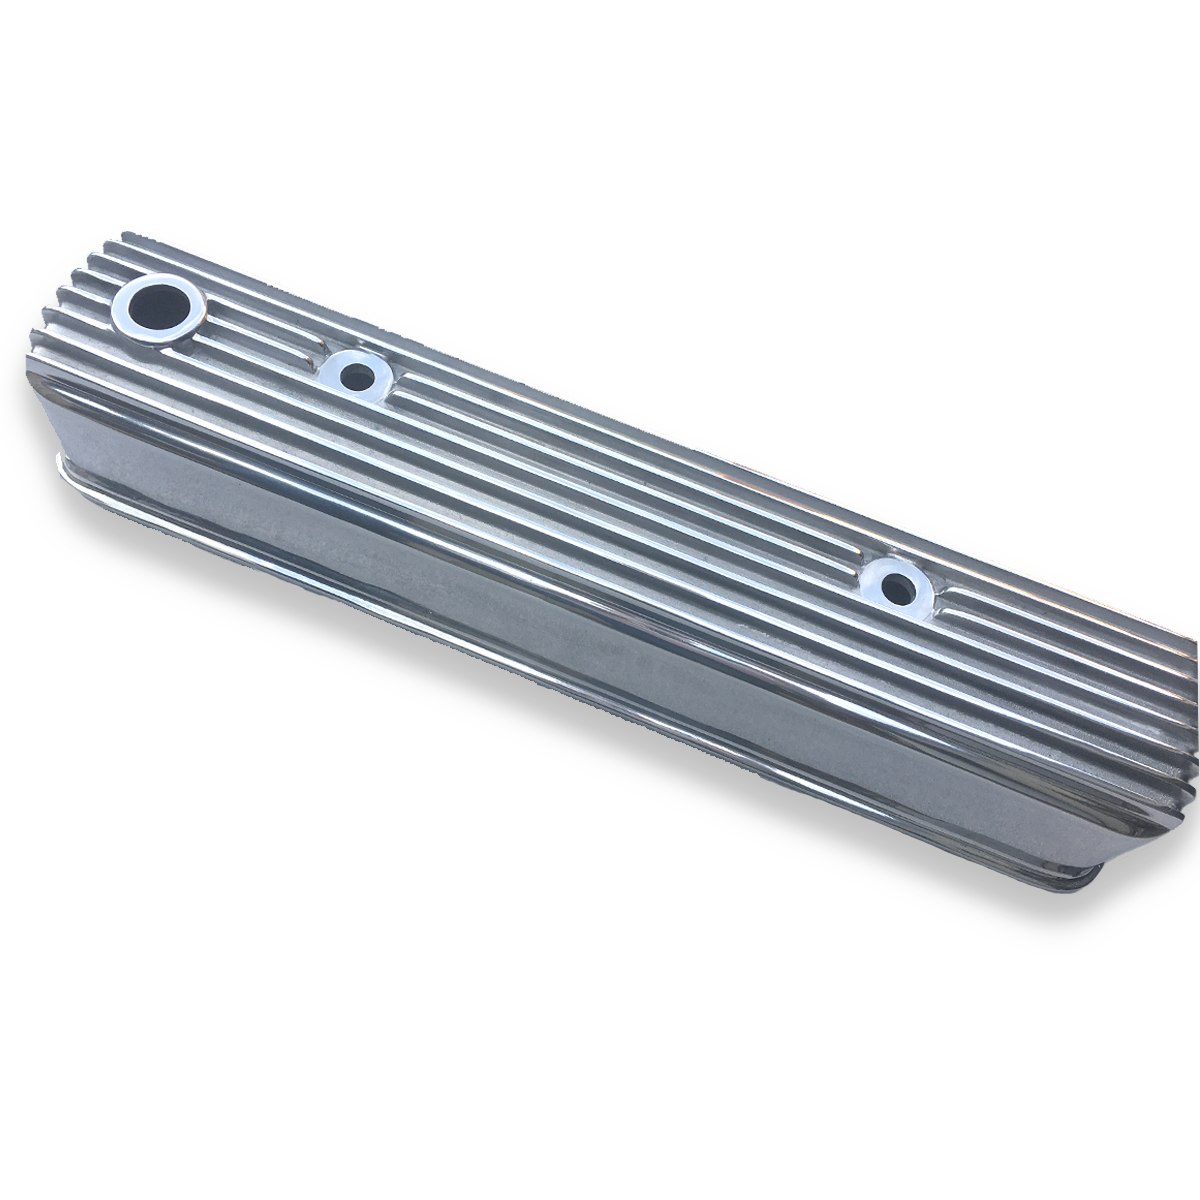 1937-1962 Chevrolet 216235 and 261 engine High-polished Aluminum Valve Cover